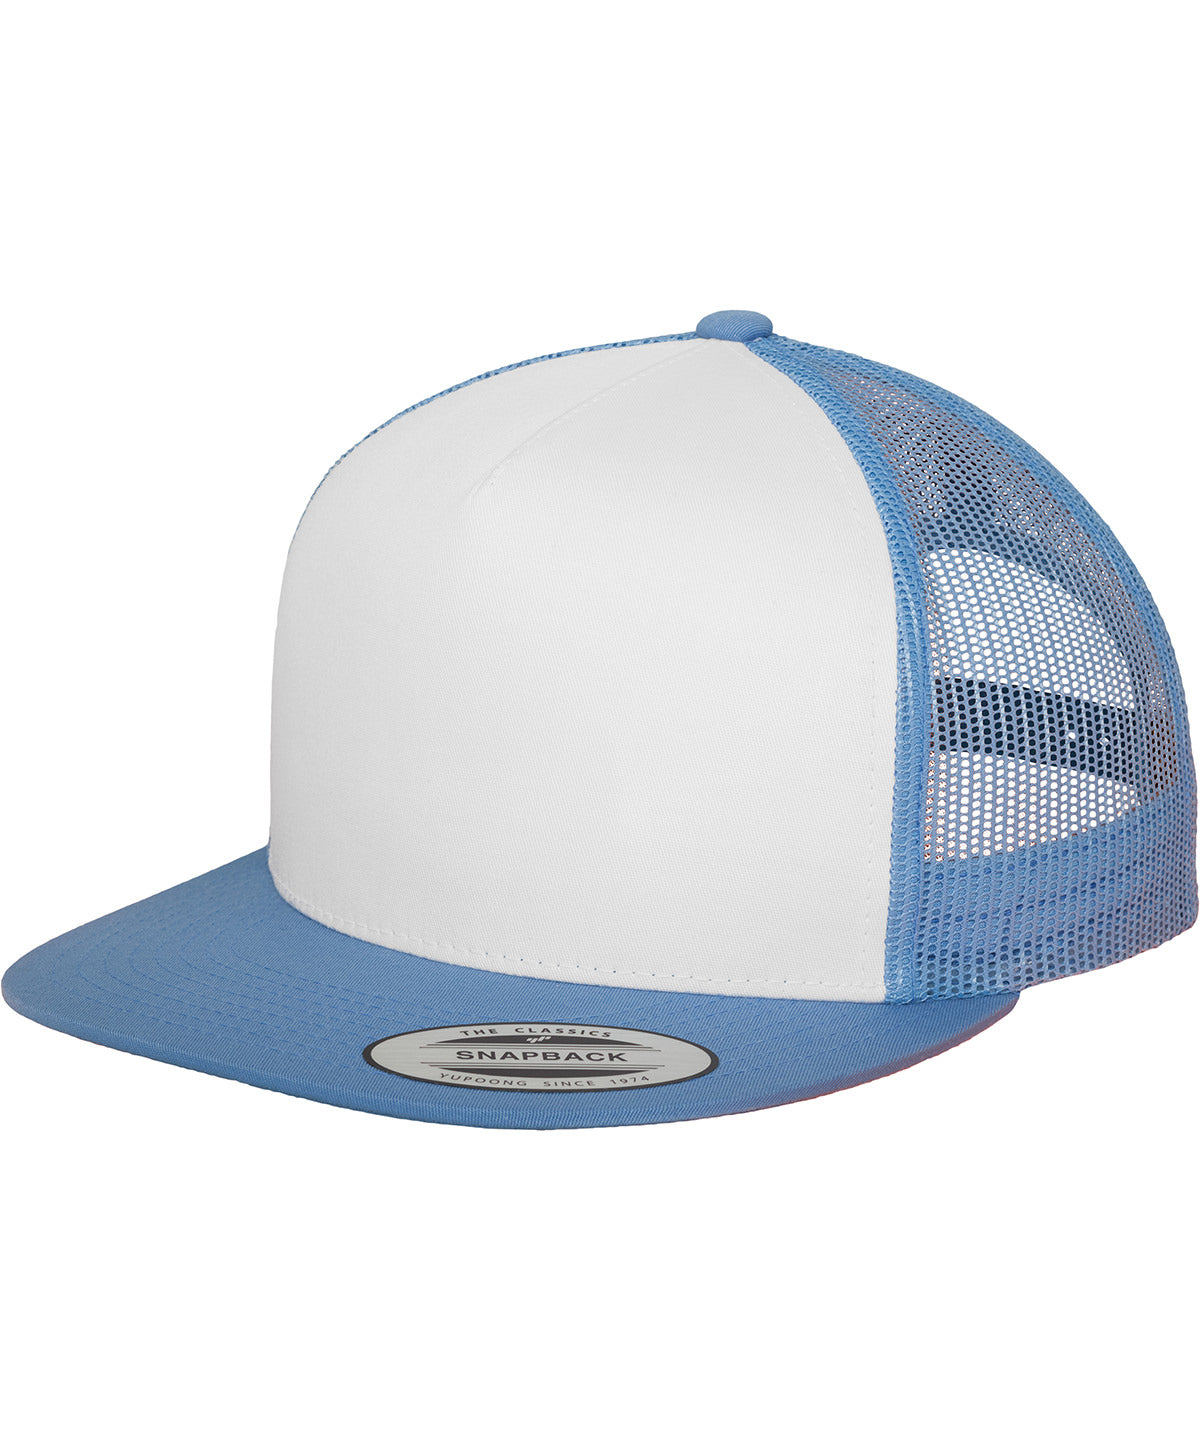 C.Blue/White/C.Blue - Classic trucker (6006W) Caps Flexfit by Yupoong Headwear, New Colours for 2023, Rebrandable Schoolwear Centres